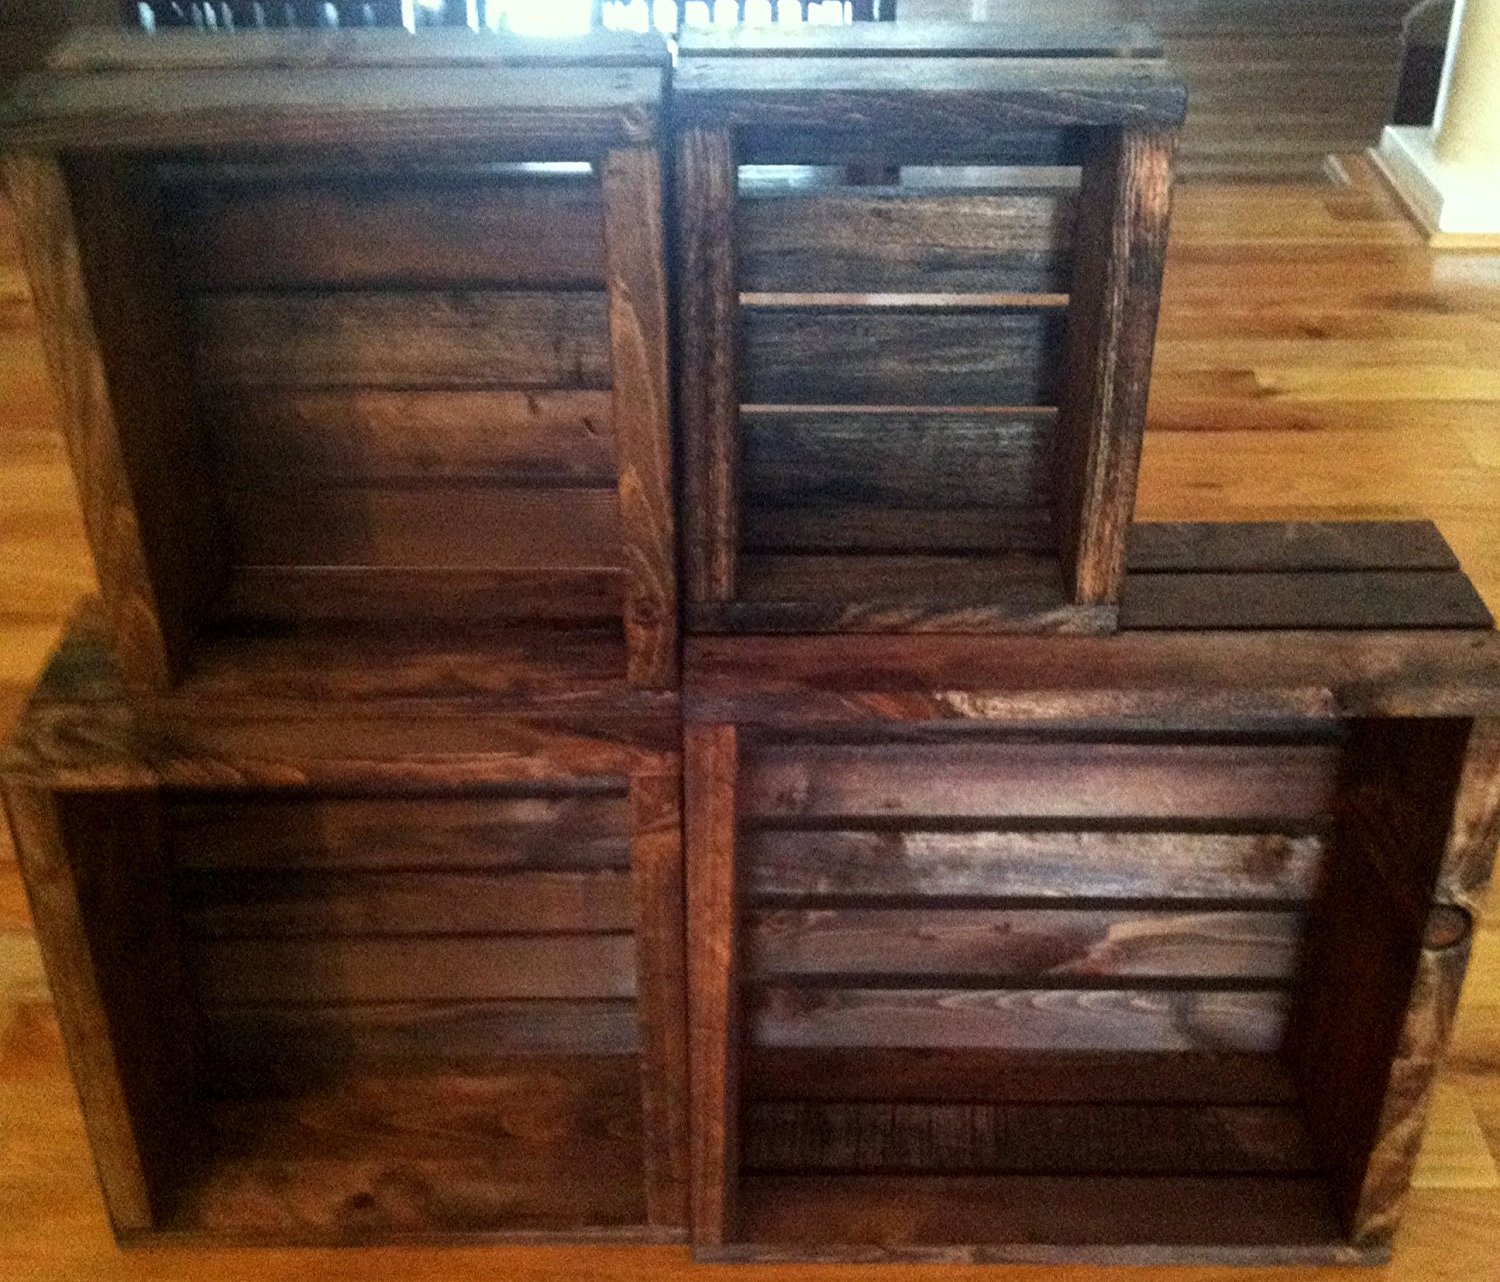 Amazon.com: Vintage Stained- Rustic Wood Crates- Set of 4: Home ...